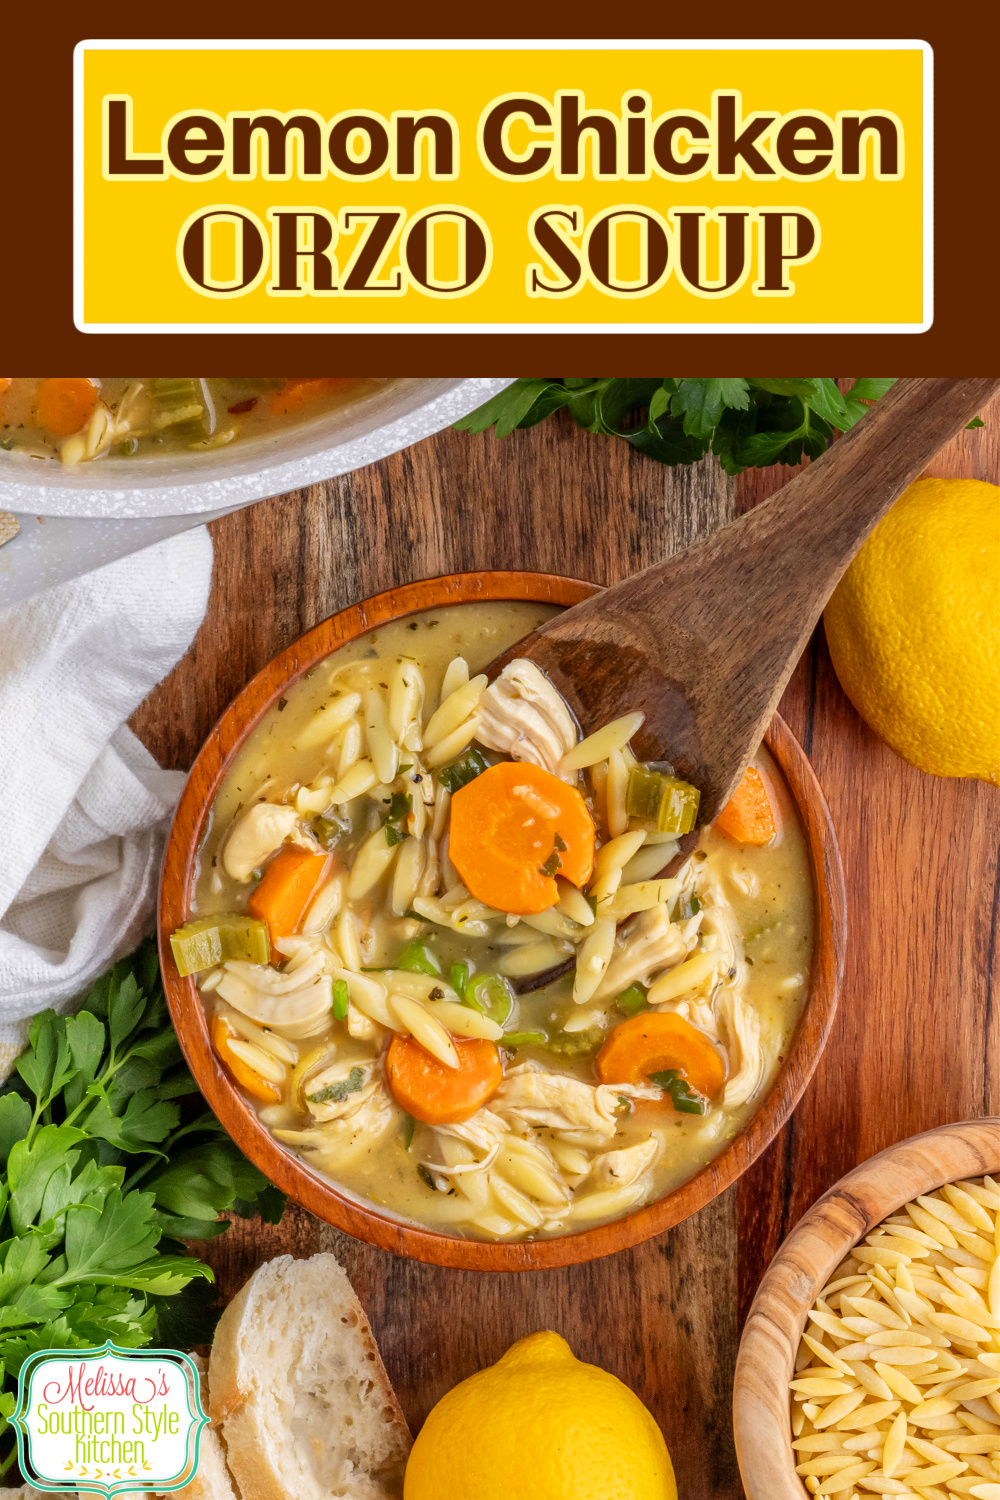 This flavorful Lemon Chicken Orzo Soup features a bright lemon infused flavor paired with tender orzo pasta and chicken. #chickensoup #chickenorzosoup #lemonchicken #lemonchickensoup #orzopasta #orzosoup via @melissasssk